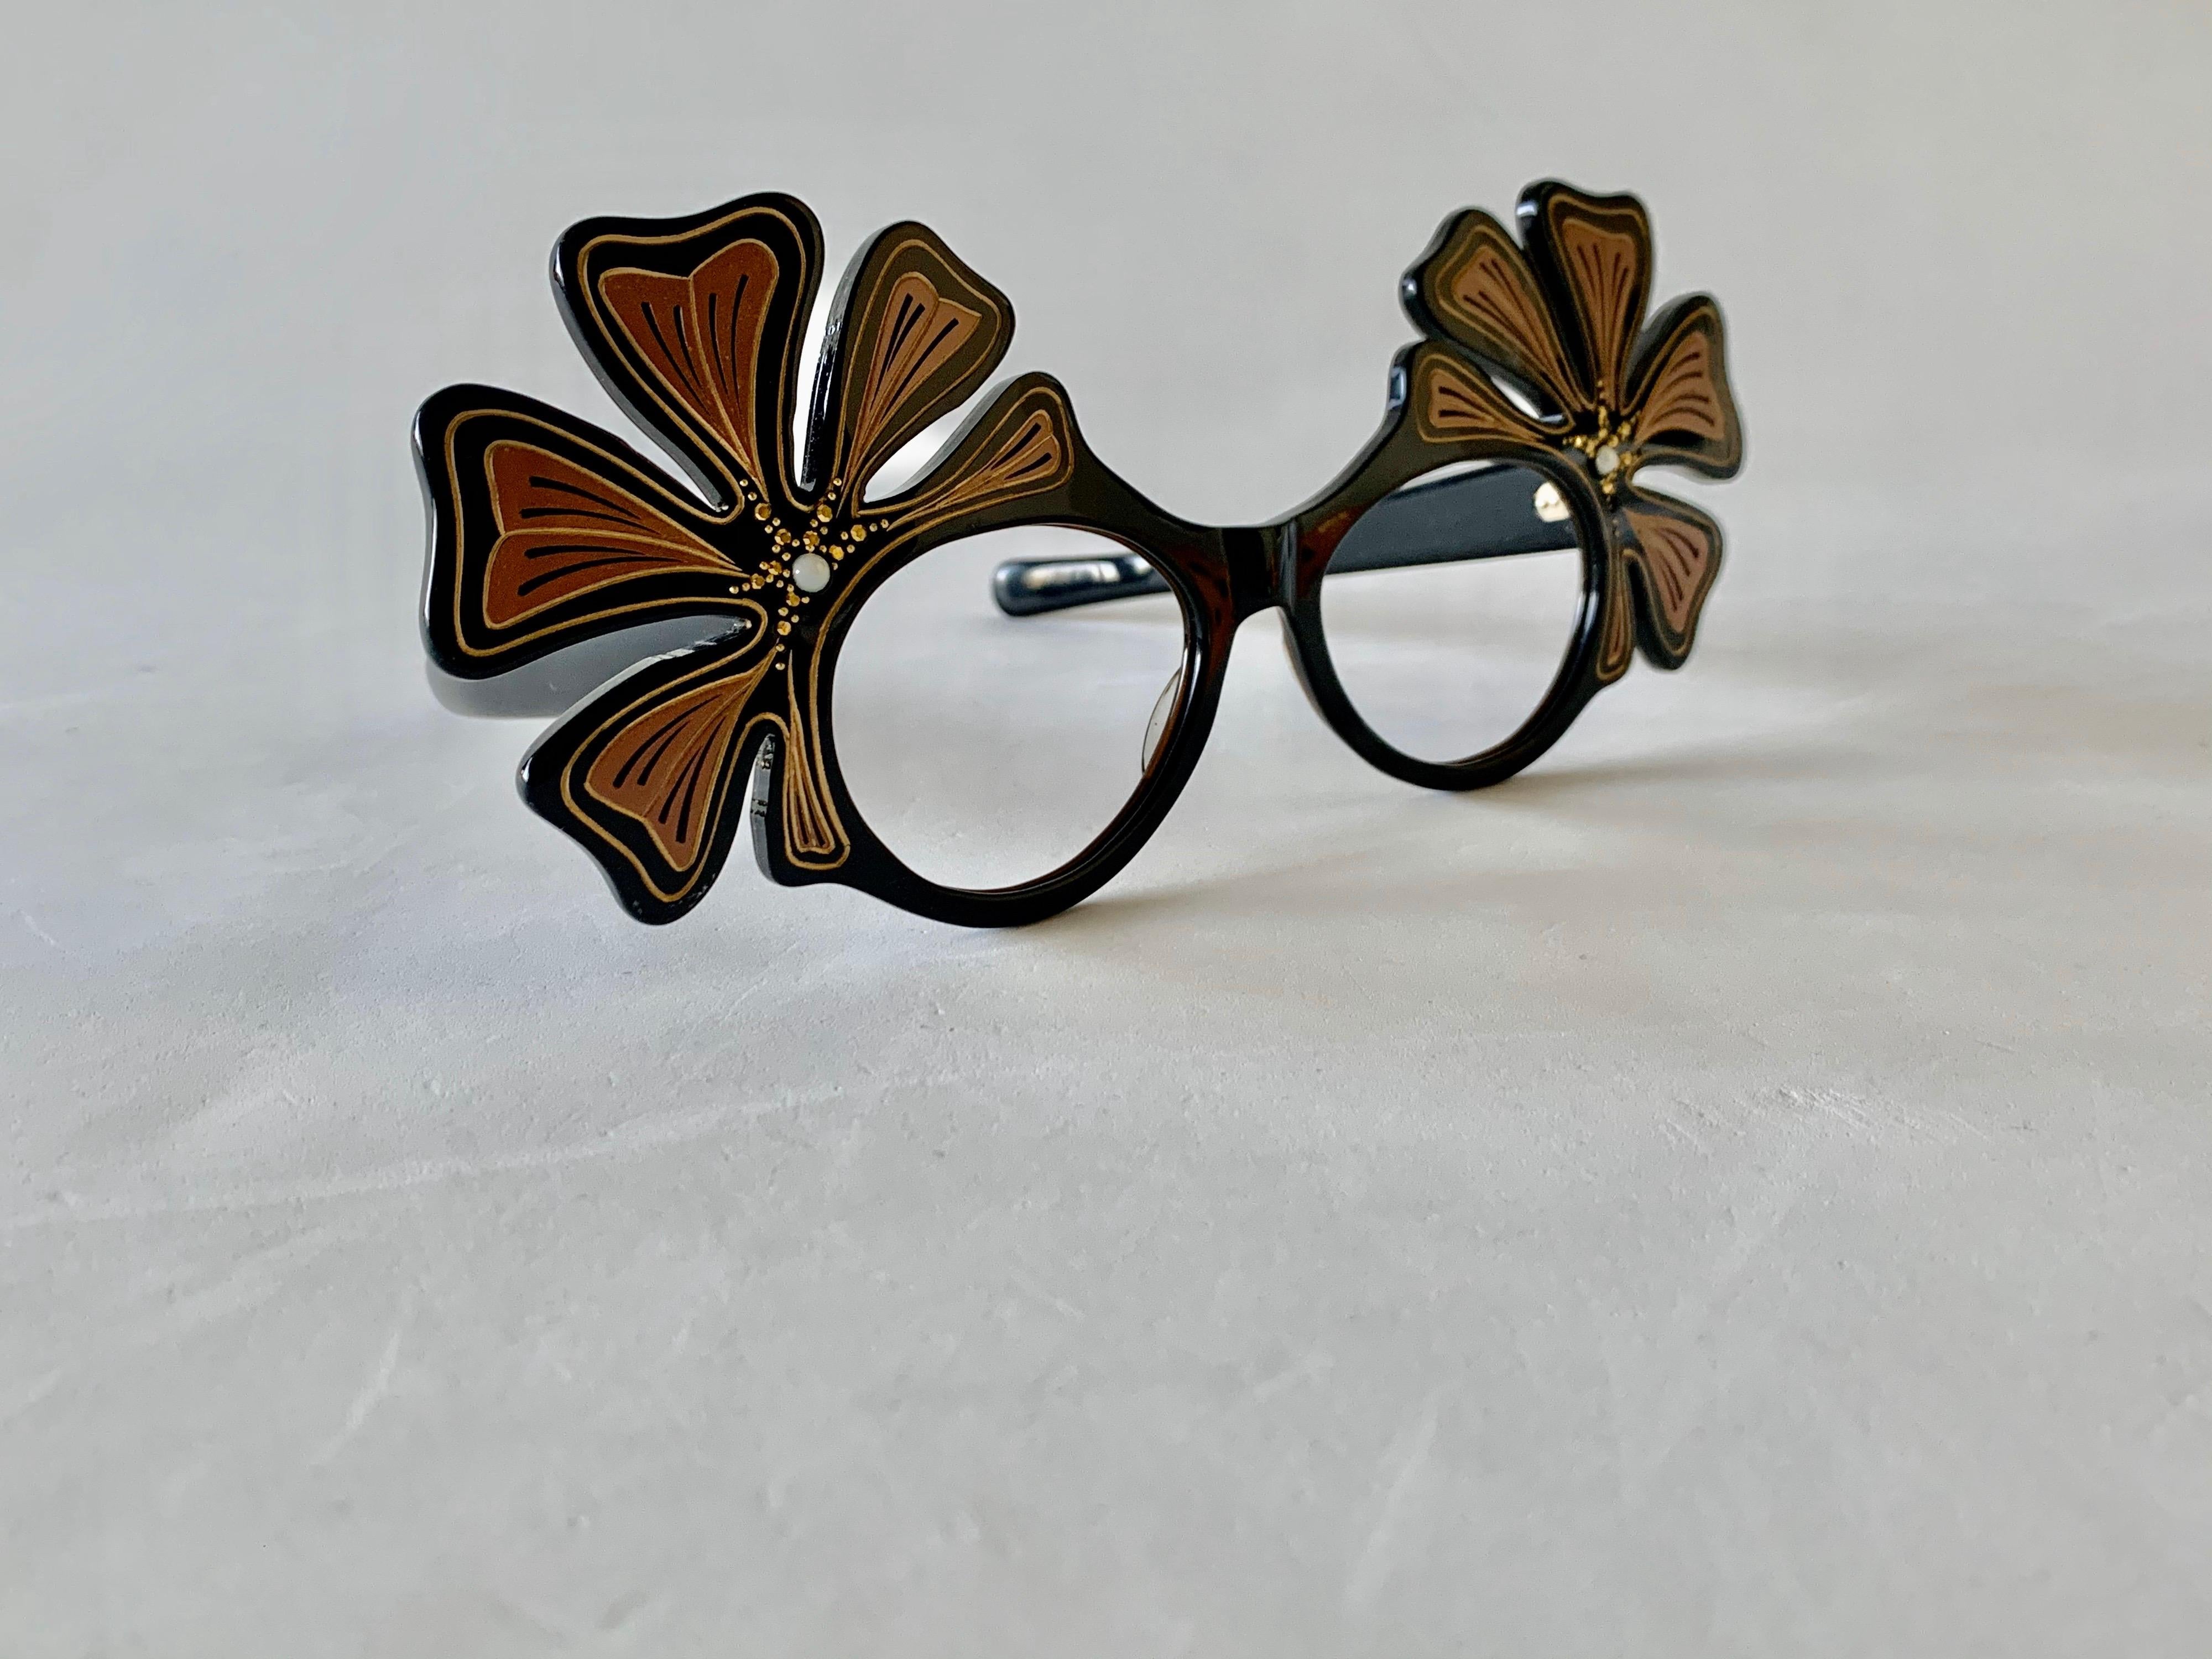 Unique one-of-a-kind deco wing Frames, hand painted and embellished with faux pearls and rhinestones for that WOW effect. Put in your own prescription in good company and turn your face into a work of art with this original pair of vintage